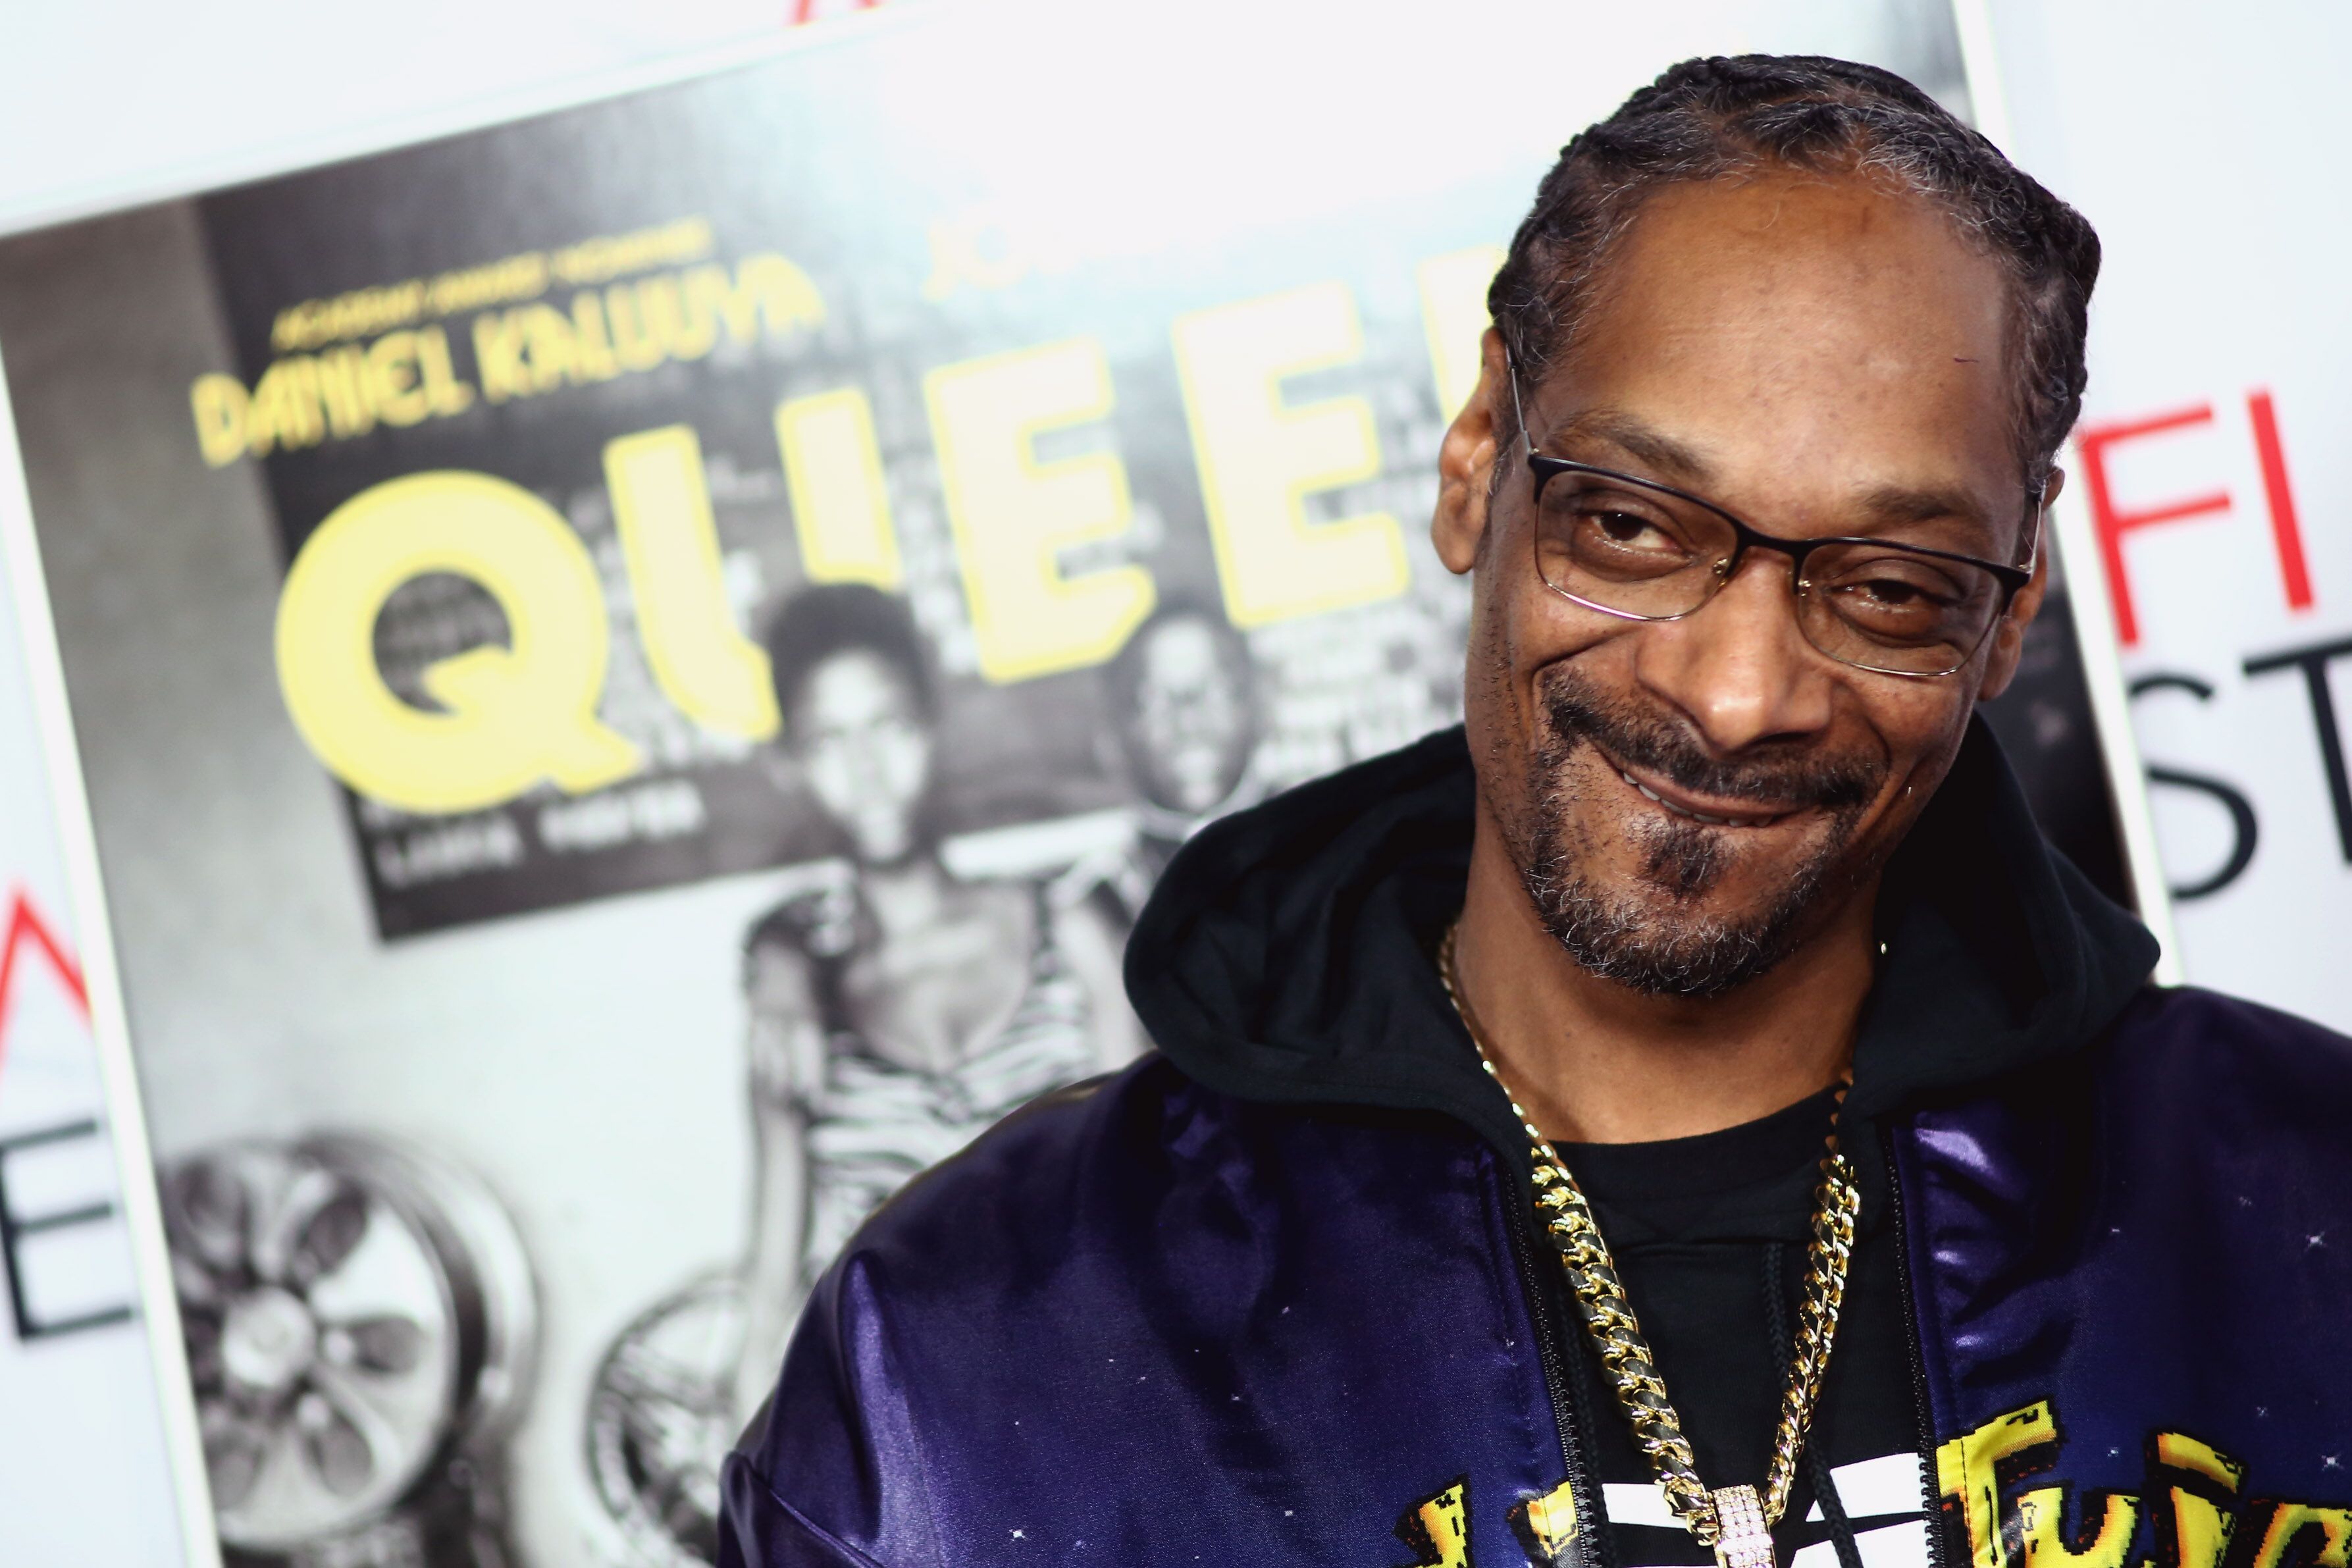 Snoop Dogg attends the AFI FEST 2019 Presented By Audi premiere of "Queen & Slim" at TCL Chinese Theatre on November 14, 2019 in Hollywood, California. | Source: Getty Images